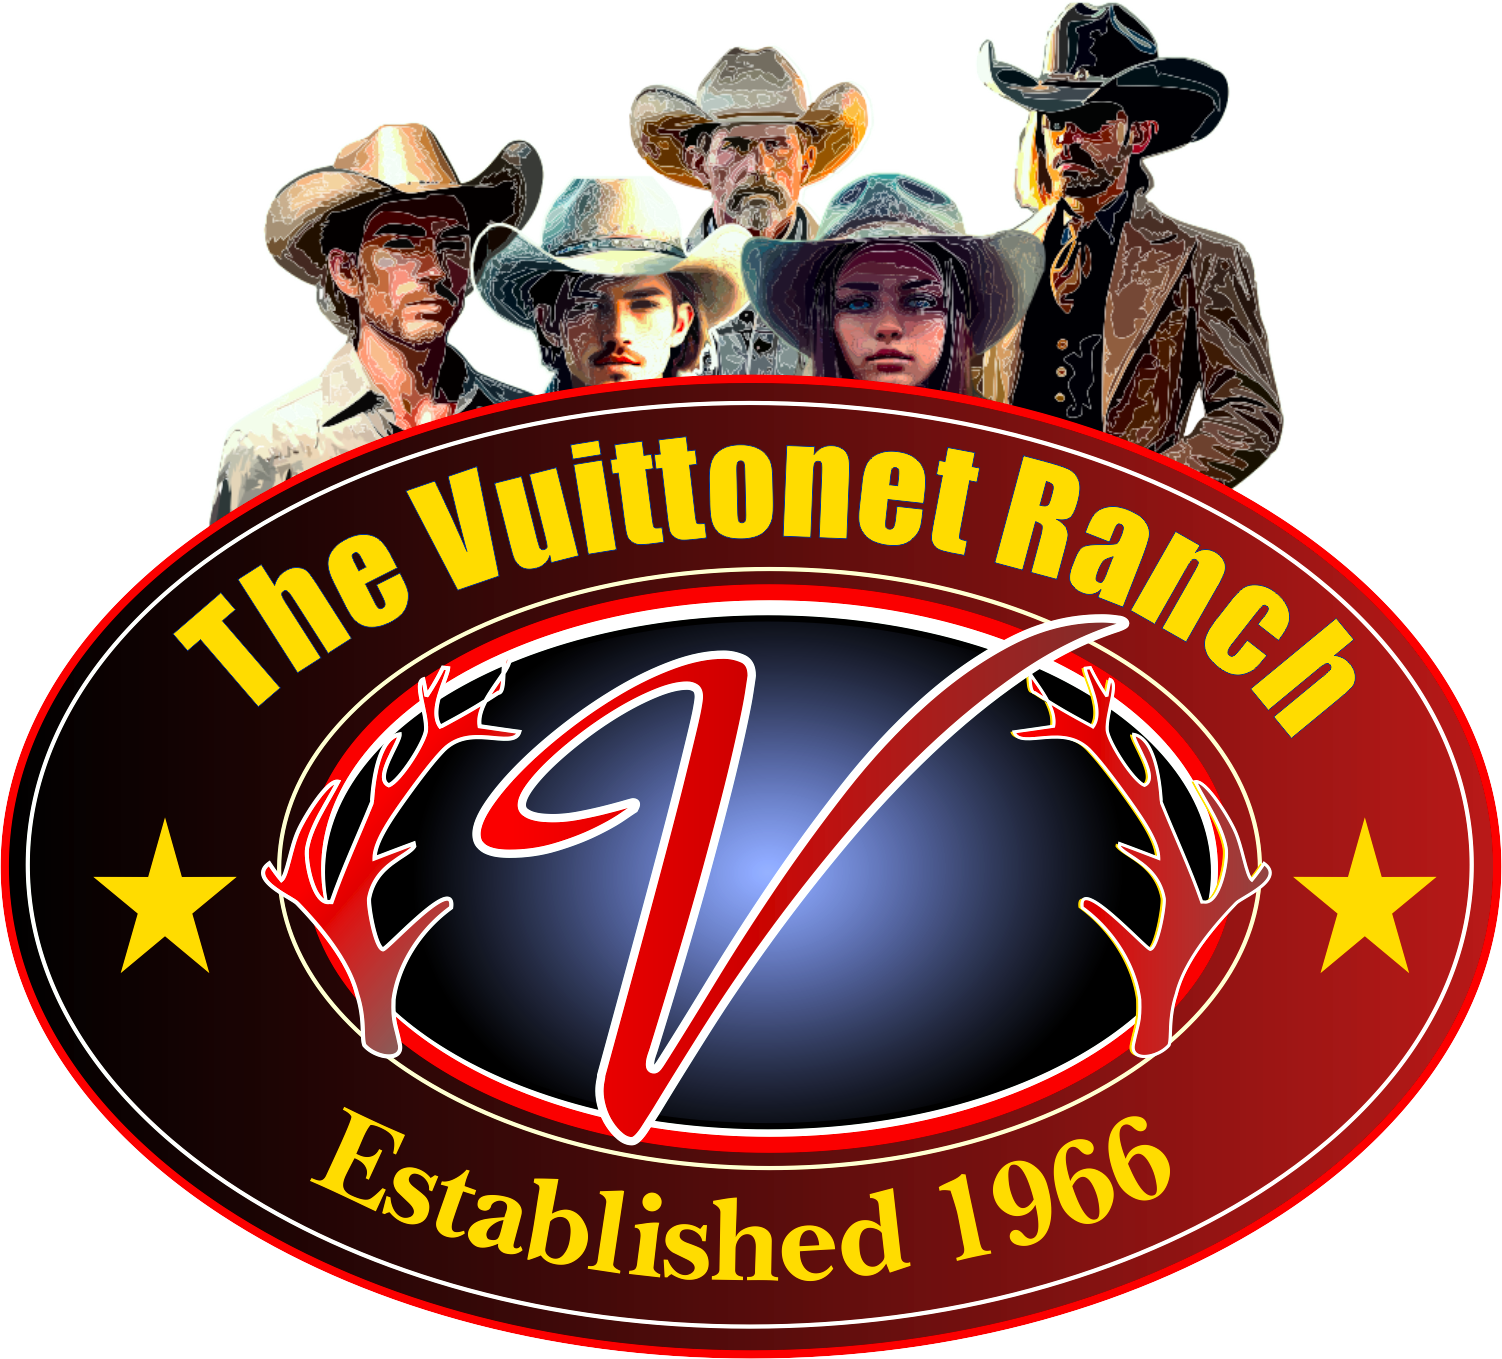 The Vuittonet Ranch (TVR) was founded in 1966 by Juan Vuittonet. His great-grandfather, Felix Alphonse Vuittonet, immigrated from Algeria, Africa, as a French Colonolizer settler from France in 1857. 
He came through Ellis Island to Louisiana, near the Gulf of Mexico, and later moved to Brownsville, Texas, in 1863. 
Felix purchased a bicycle in San Antonio and a couple in Corpus Christi, Texas, in the early 1870s.
Mr. Muhl built and sold velocipedes, an early form of two-wheeled "machines," in San Antonio.
Felix sold the "bicycles" in his Mercantile business on Elizebeth Street and crafted his parts or salvaged parts from junked bicycles until the turn of the 20th century.
Alfred, Felix's son, born in 1876, grew up around the general store and the sales and repair of bicycles sold at the store.
As time progressed, Alfred had several sons who temporarily worked around the store at an early age. One of Alfred's sons, Juan Sr., was an apprentice to his grandfather's craft, for Alfred had died by 1897. 
Incidentally, Felix A. Vuittonet died in 1903 and left his son under the care of his sister.
Juan Sr., at age 10, left home and moved to San Antonito Ranch, near Harlingen, Texas, in 1904 to work as a farm hand and, using his generational craft, to become the go-to guy in bike repair and occasional sales or trades.
Juan Sr., in 1920, had a son at the "Ranch," who learned the craft and, by 1929, had become the go-to guy for any bicycle that crossed his path.
Eddie Vuittonet, Juan's son, continued the generational bicycle legacy by opening his first bicycle shop in 1997 in Raymondville, Texas.
Eddie Dad's passion for farming, ranching, and bicycles turned into a lifelong pursuit that left a lasting legacy in the Cameron and Willacy County communities.
Eddie returned to the Vuittonet Ranch in 2009 after closing his bike shop when his 90-year-old dad retired. 
The Vuittonet Ranch is still 100% family-owned and operated, and all current owners are active employees at "The Vuittonet Ranch."
Eddie Vuittonet, the founder's son, established The Vuittonet Bike Ranch in 2009, fondly named "The Vuittonet Bike Ranch" due to the family's vintage bicycle history. 
Today, the TVR division has over 100 vintage, new, refurbished, restored, and customized bicycles in its "old style" polyurethane showroom, which is garnished with vintage tin signs and other collectibles from the past.
The facility also houses an old, vintage toy store.
The Vuittonet Ranch is currently a Macargi, Husky, HJC, Reid, Strider, Summit, and other name-brand authorized sales and repair Dealer.
The Vuittonet Bicycle Ranch division sells to the public and opens on Weekdays and Saturdays from 9 am to 5 pm. On Sundays, TVR opens at 10 am and closes at noon.
The Vuittonet Ranch bicycle division also sells bicycle parts for the do-it-yourselfer or bike show enthusiasts.
As a TVR wholesale dealer, it offers discounts on all parts so bike shop owners can keep their inventory fully stocked without breaking the bank or meeting all the difficult criteria other bicycle parts distributors set forth.
We source only the best parts, ensuring that your bike shop, or as part of our elite customer component, can access the highest quality products on the market by what we stock or that we can order for you.
But that's not all – TVR dealers receive a 20% wholesale discount on all vintage, refurbished bicycles. Imagine offering your customers the charm of a vintage bike, fully restored to its former glory, at a fraction of the cost. These unique bicycles will fly off your shelves and set your business apart.
At Vuittonet Bike Ranch, we understand the importance of providing value to our dealers. That's why we work tirelessly to negotiate the best prices and pass those savings on to you. 
With our wholesale discounts, you can increase your profit margin while offering your customers top-notch products.
Take advantage of this incredible opportunity to elevate your business and drive sales. 
Join the Vuittonet Bike Ranch family today and watch your profits soar! 
Contact us now to learn more about our TVR wholesale discounts and start saving on high-quality bicycle parts and refurbished bicycles.
We are open to the general public and invite all to come by and "adopt" a bicycle today or bring your bicycle for service or repair.
If you need additional details, please call 956-410-1555 between 8 am and 5 pm or text us at 956-742-1250.
You can also contact us by email at vuittonetranch@gmail.com or visit our website at thevuittonetranch.com/bicycles